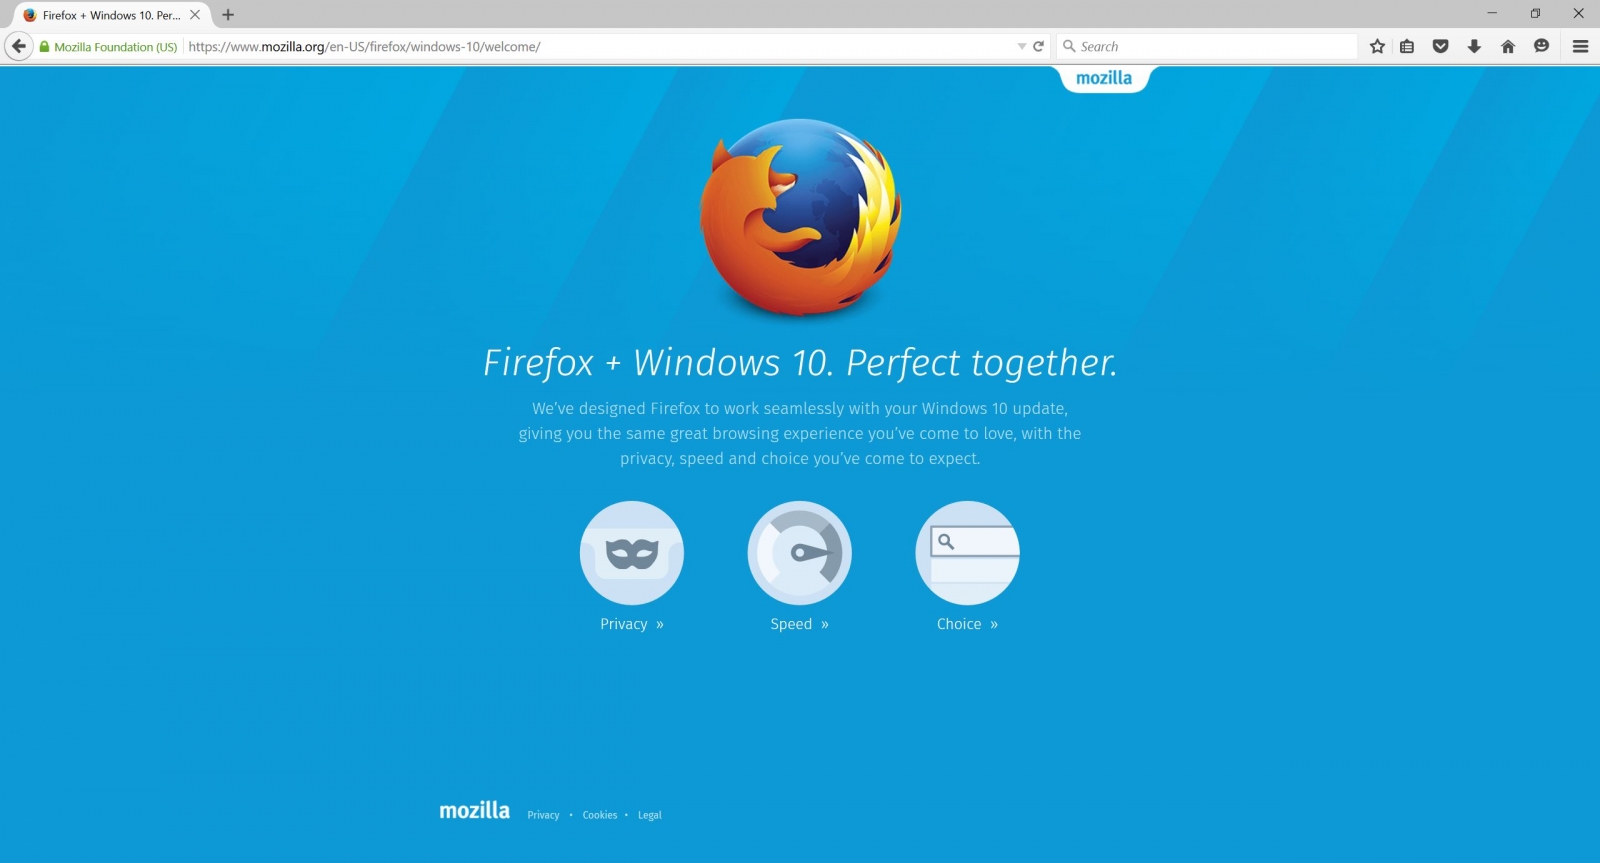 how to download and install mozilla firefox 2.0